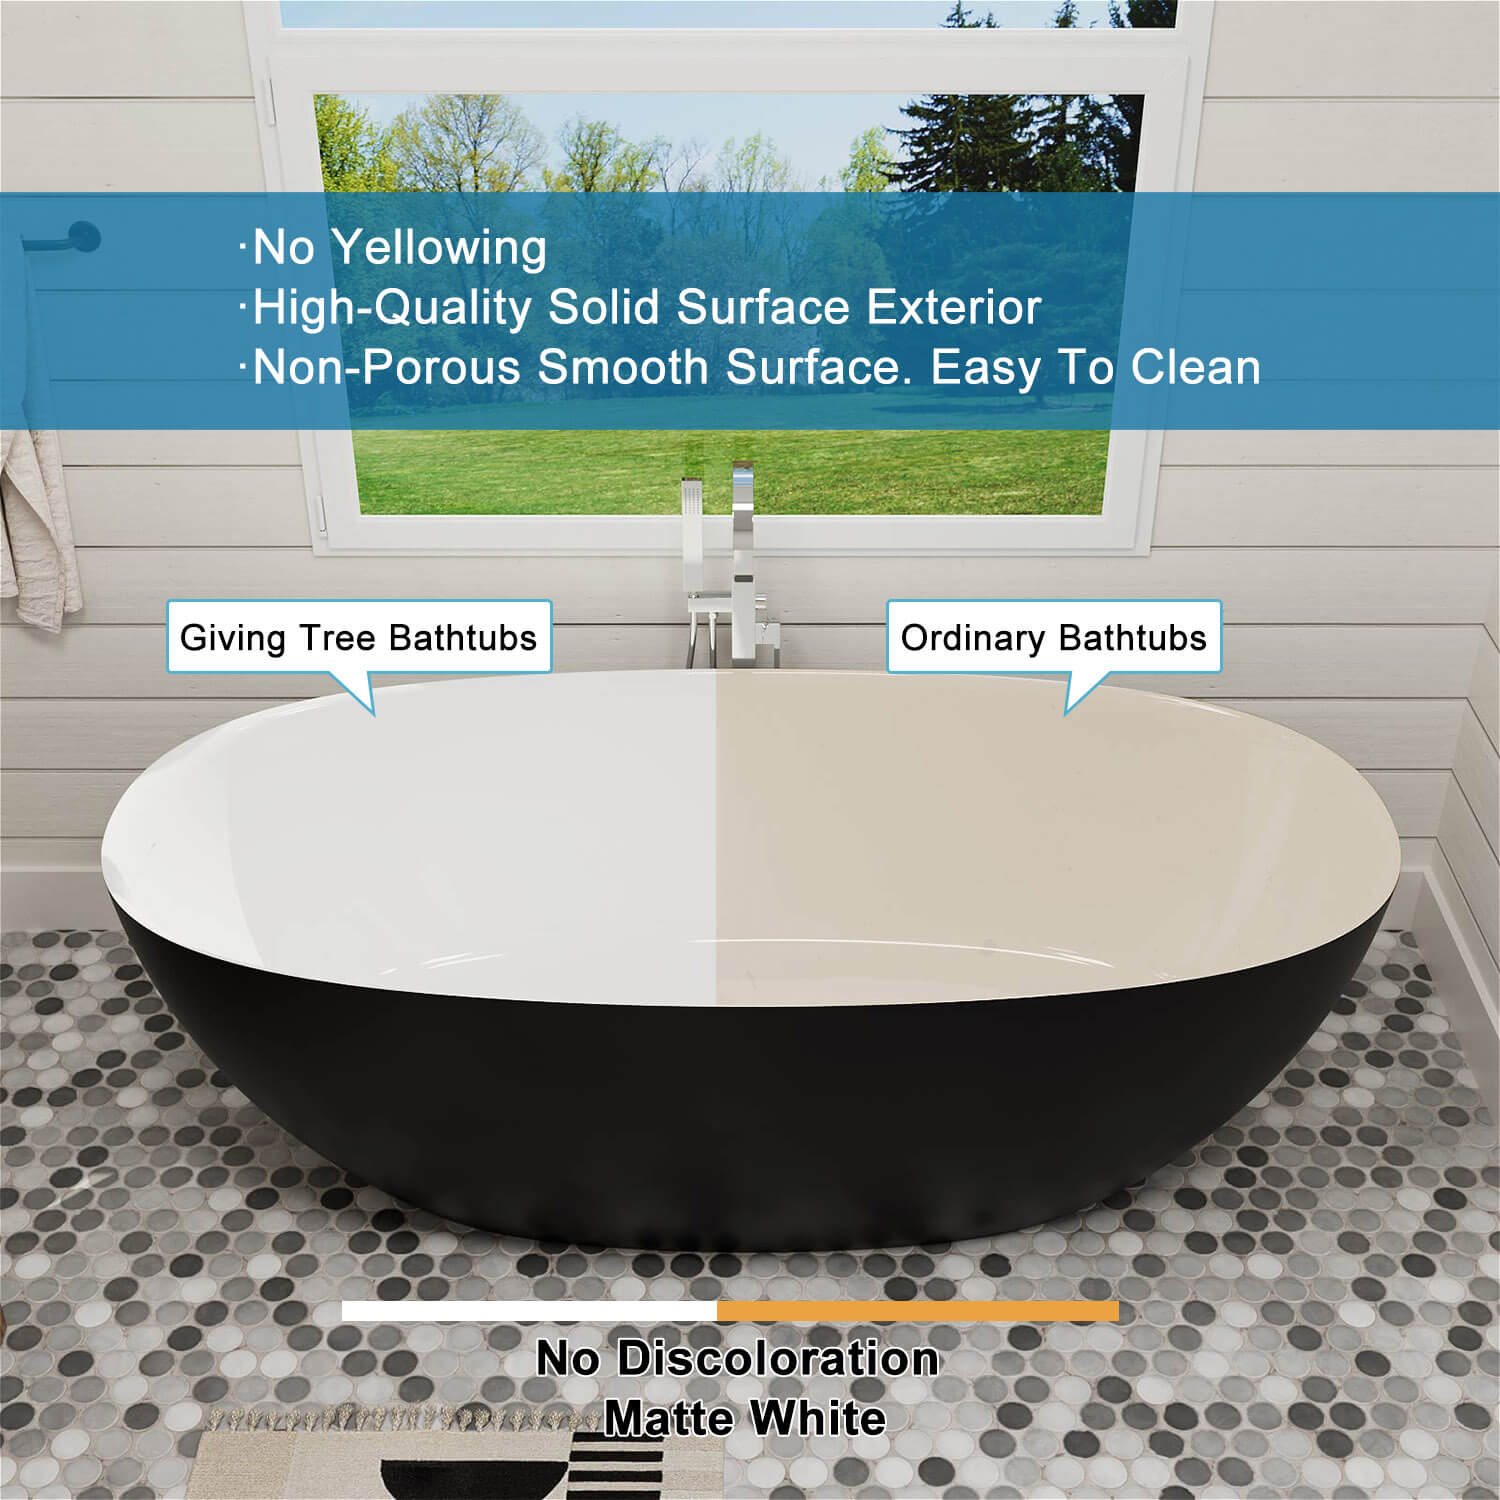 Cleaning Instructions for Modern Oval Freestanding Bathtub White Inside and Black Outside